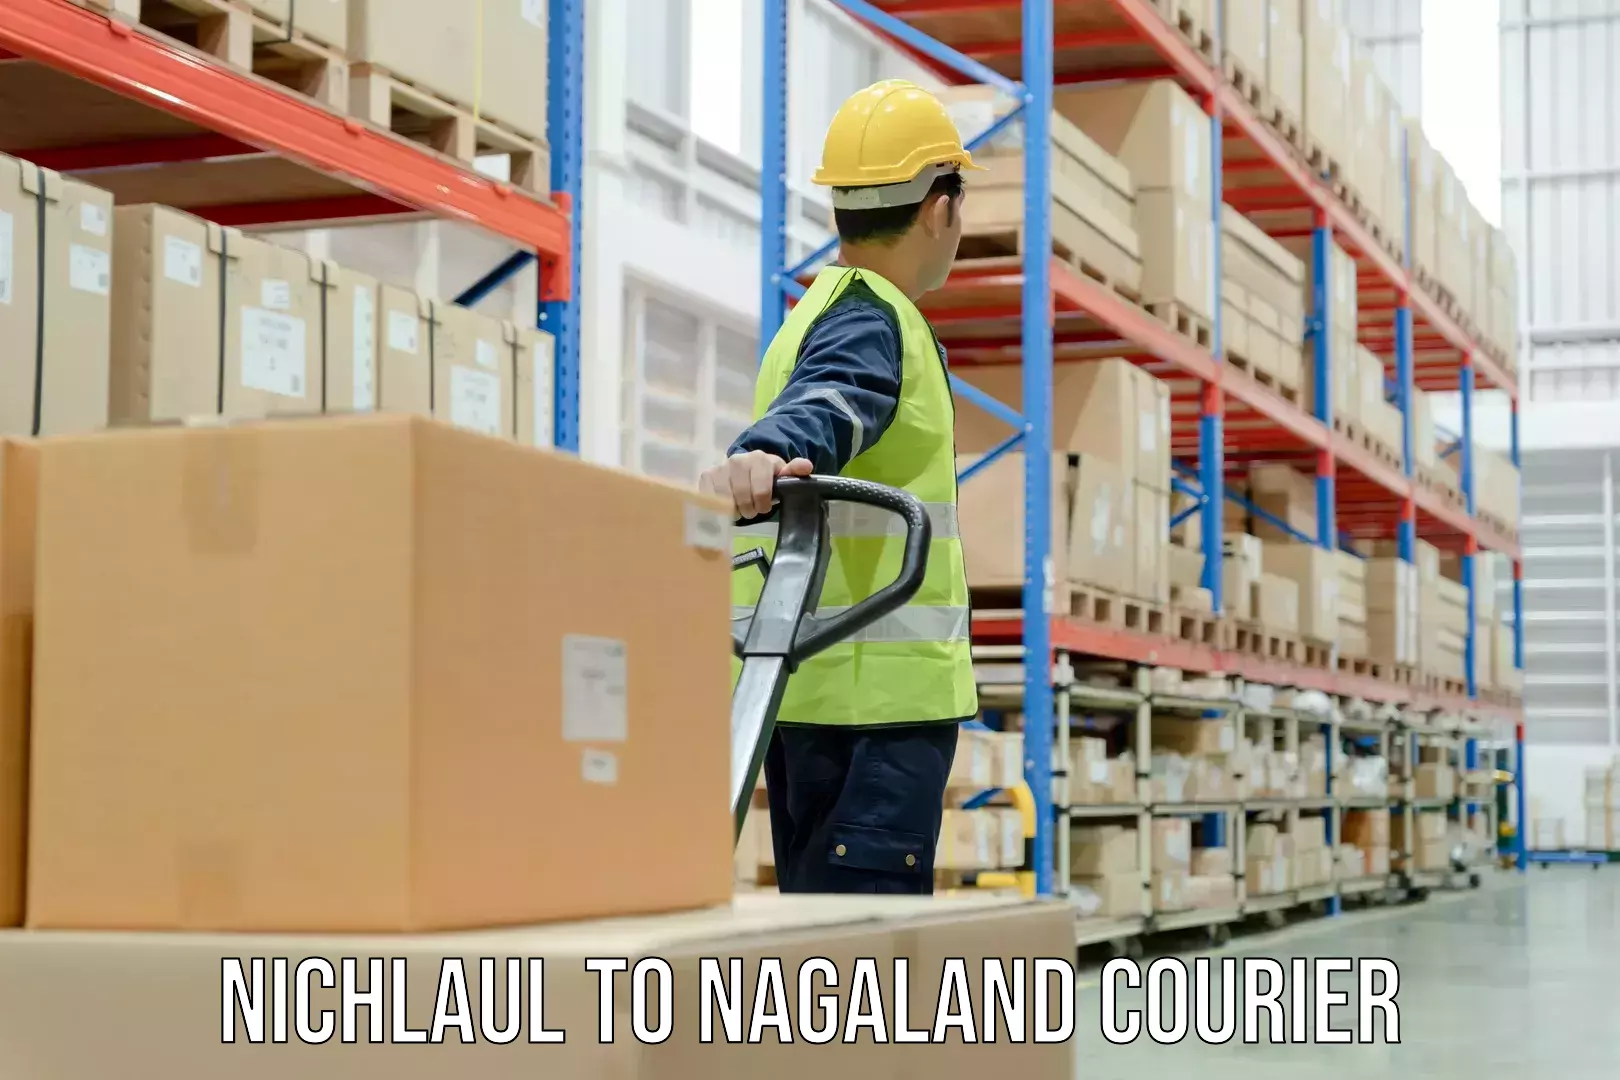 Cash on delivery service in Nichlaul to Nagaland